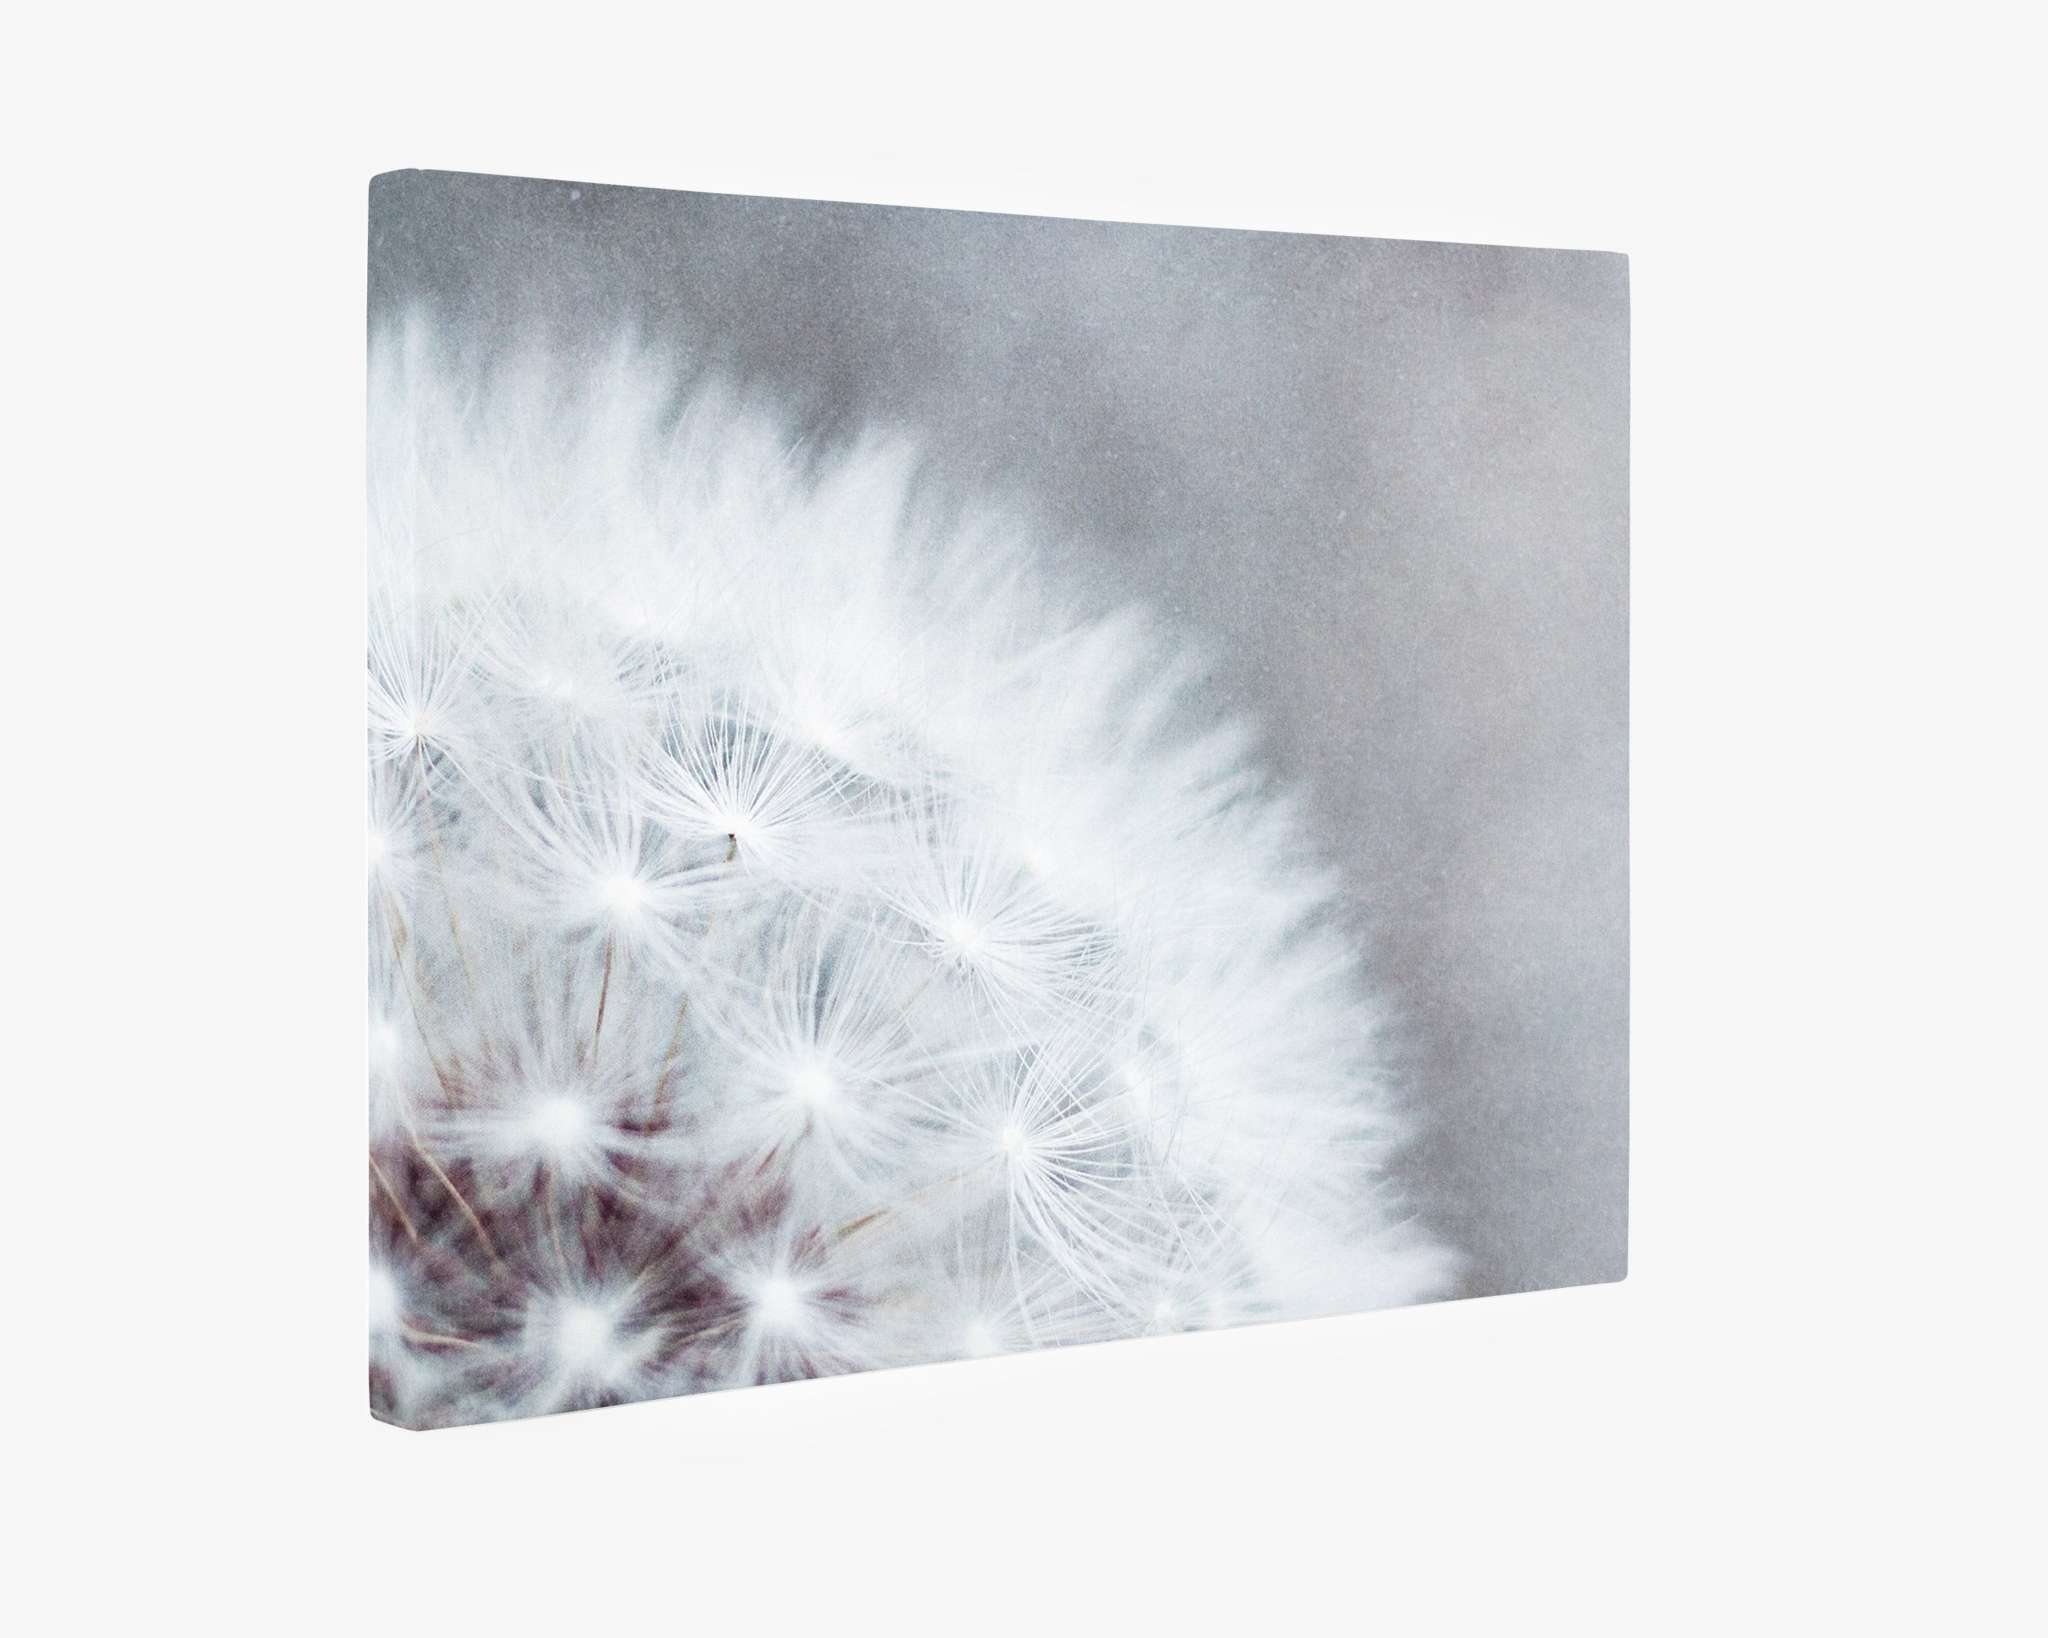 A close-up image of a dandelion seed head with delicate white seeds radiating from the center, captured through macro lens photography and set against a soft, blurry gray background. The fine details of the seeds create a light, airy, and ethereal appearance perfect for **Offley Green**'s **Grey Botanical Canvas Wall Art, 'Dandelion Queen'**.